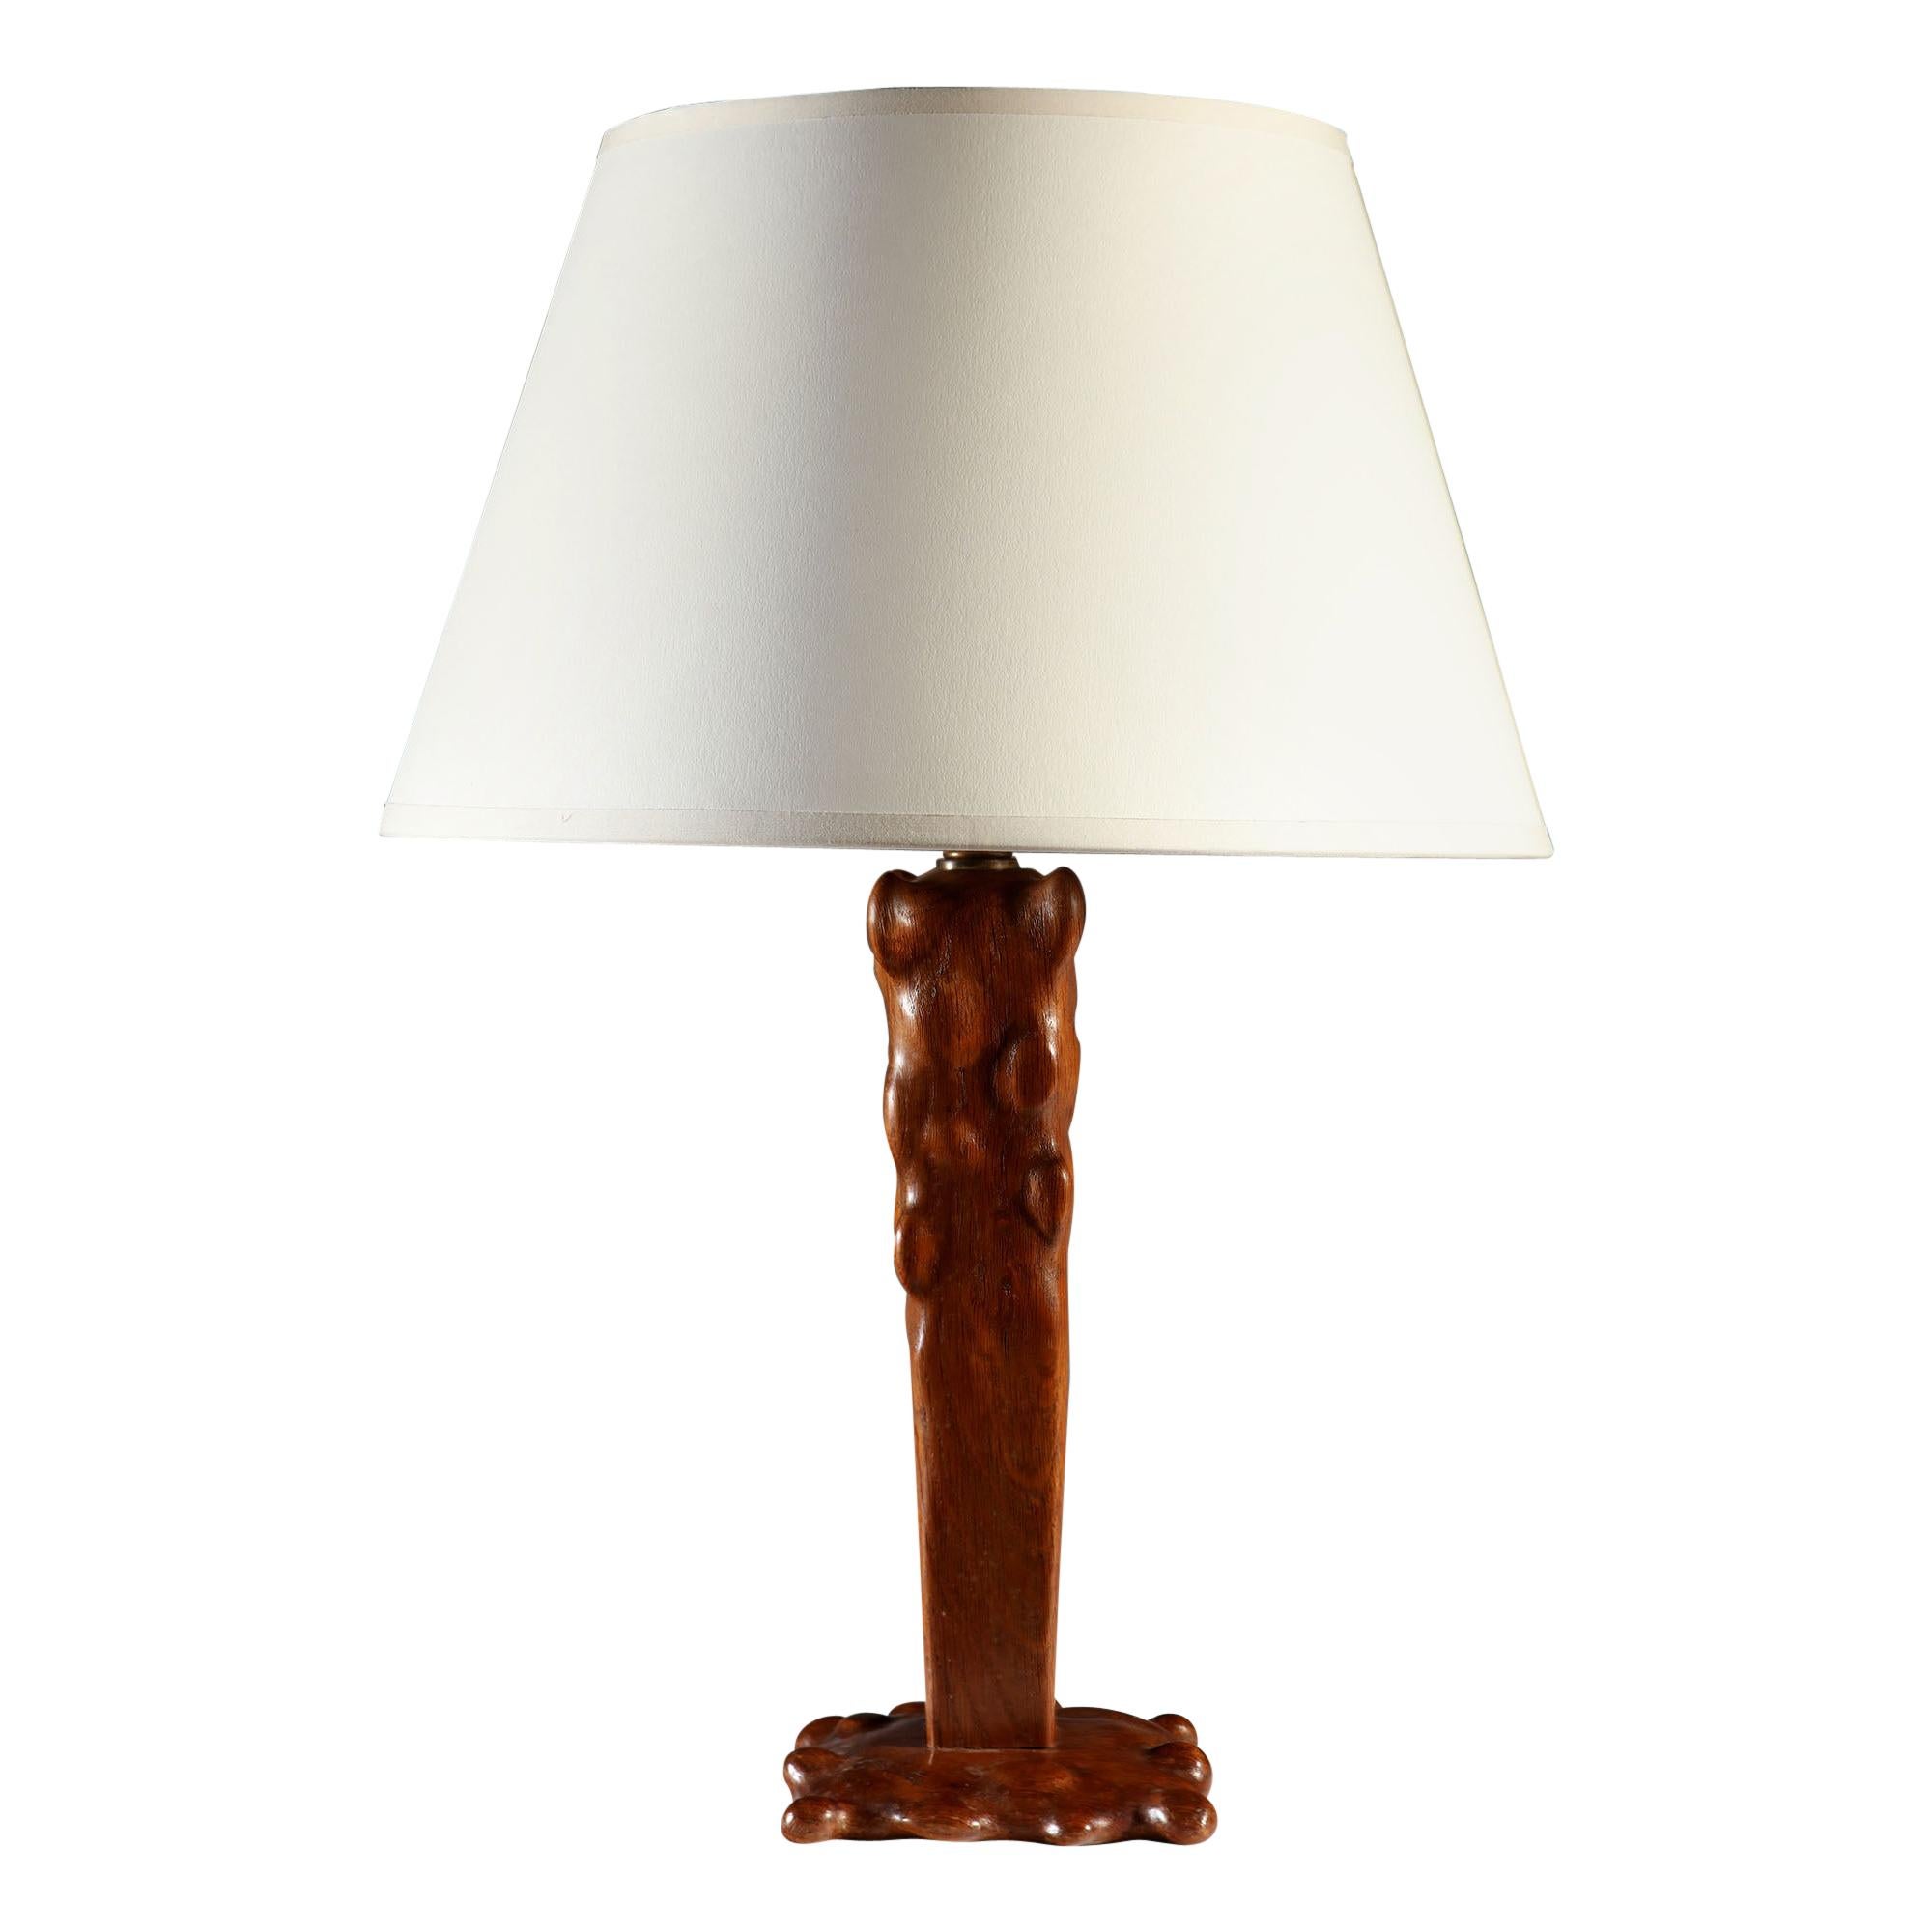 Early 20th Century Italian Signed Root Wood Table Lamp